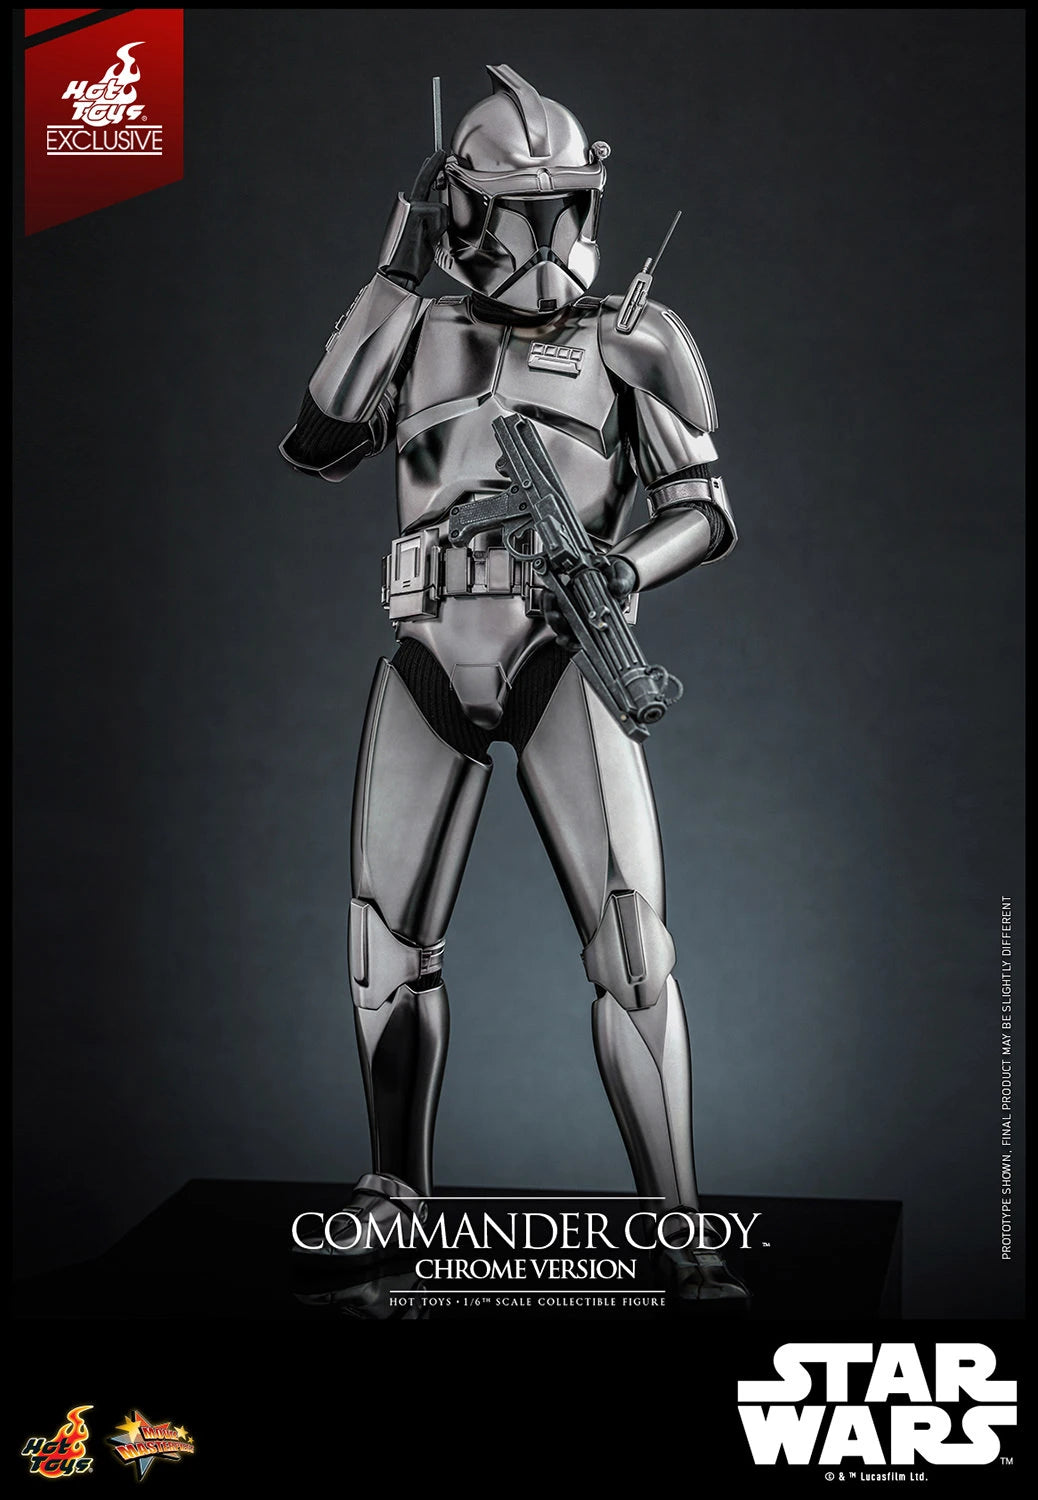 Hot Toys Star Wars Commander Cody (Chrome Version) 1/6th Scale Exclusive Limited Edition Figure